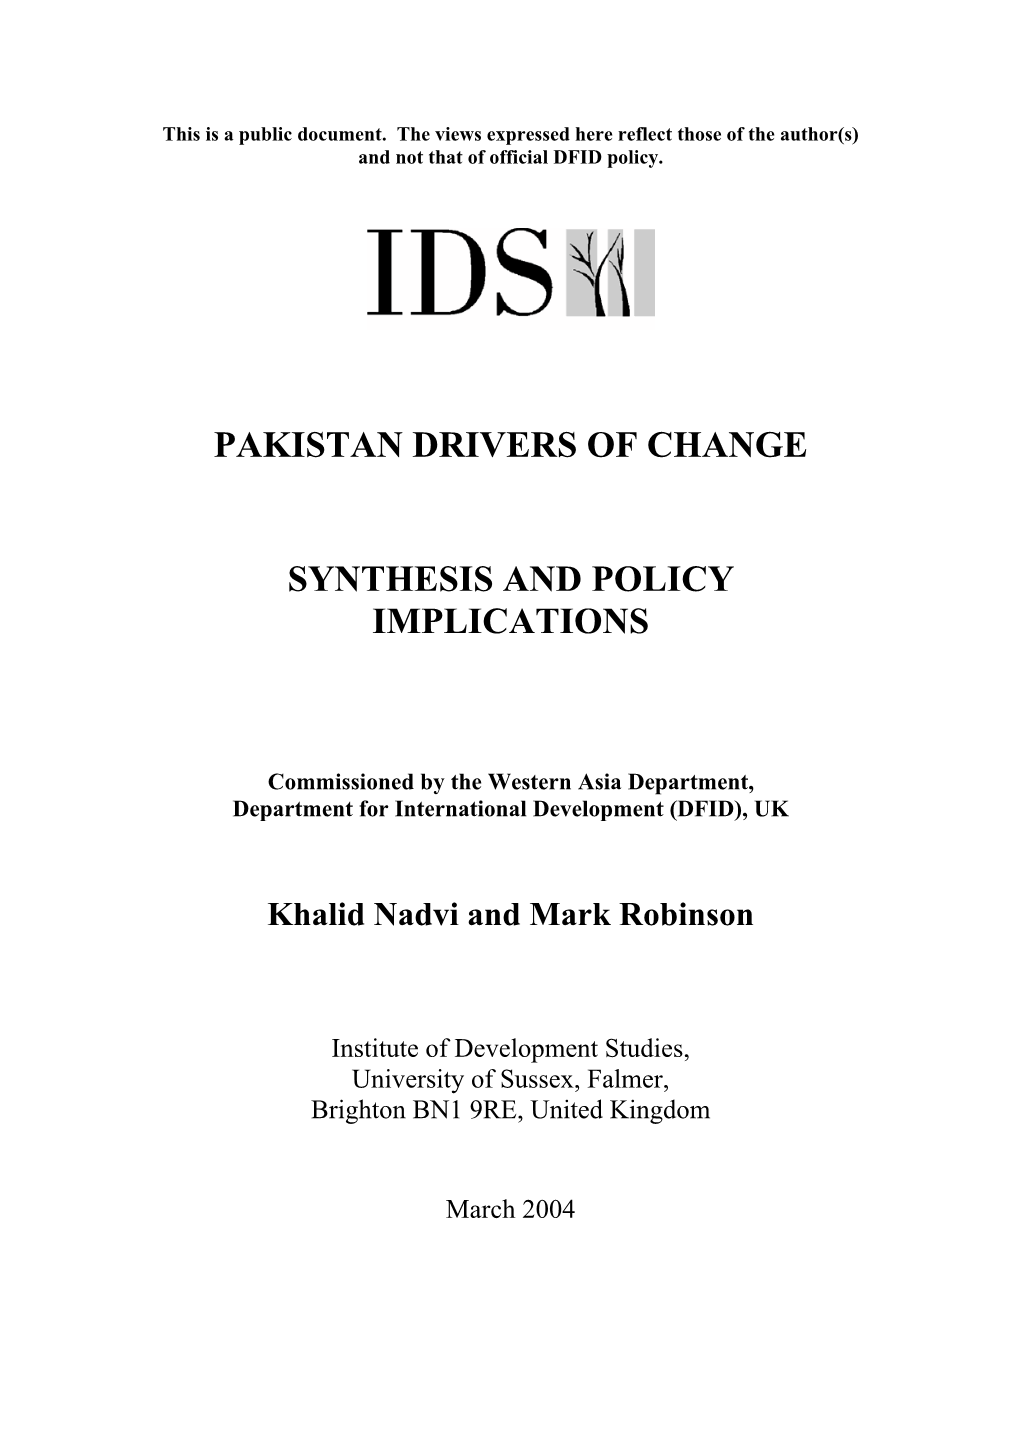 Pakistan Drivers of Change Synthesis and Policy Implications